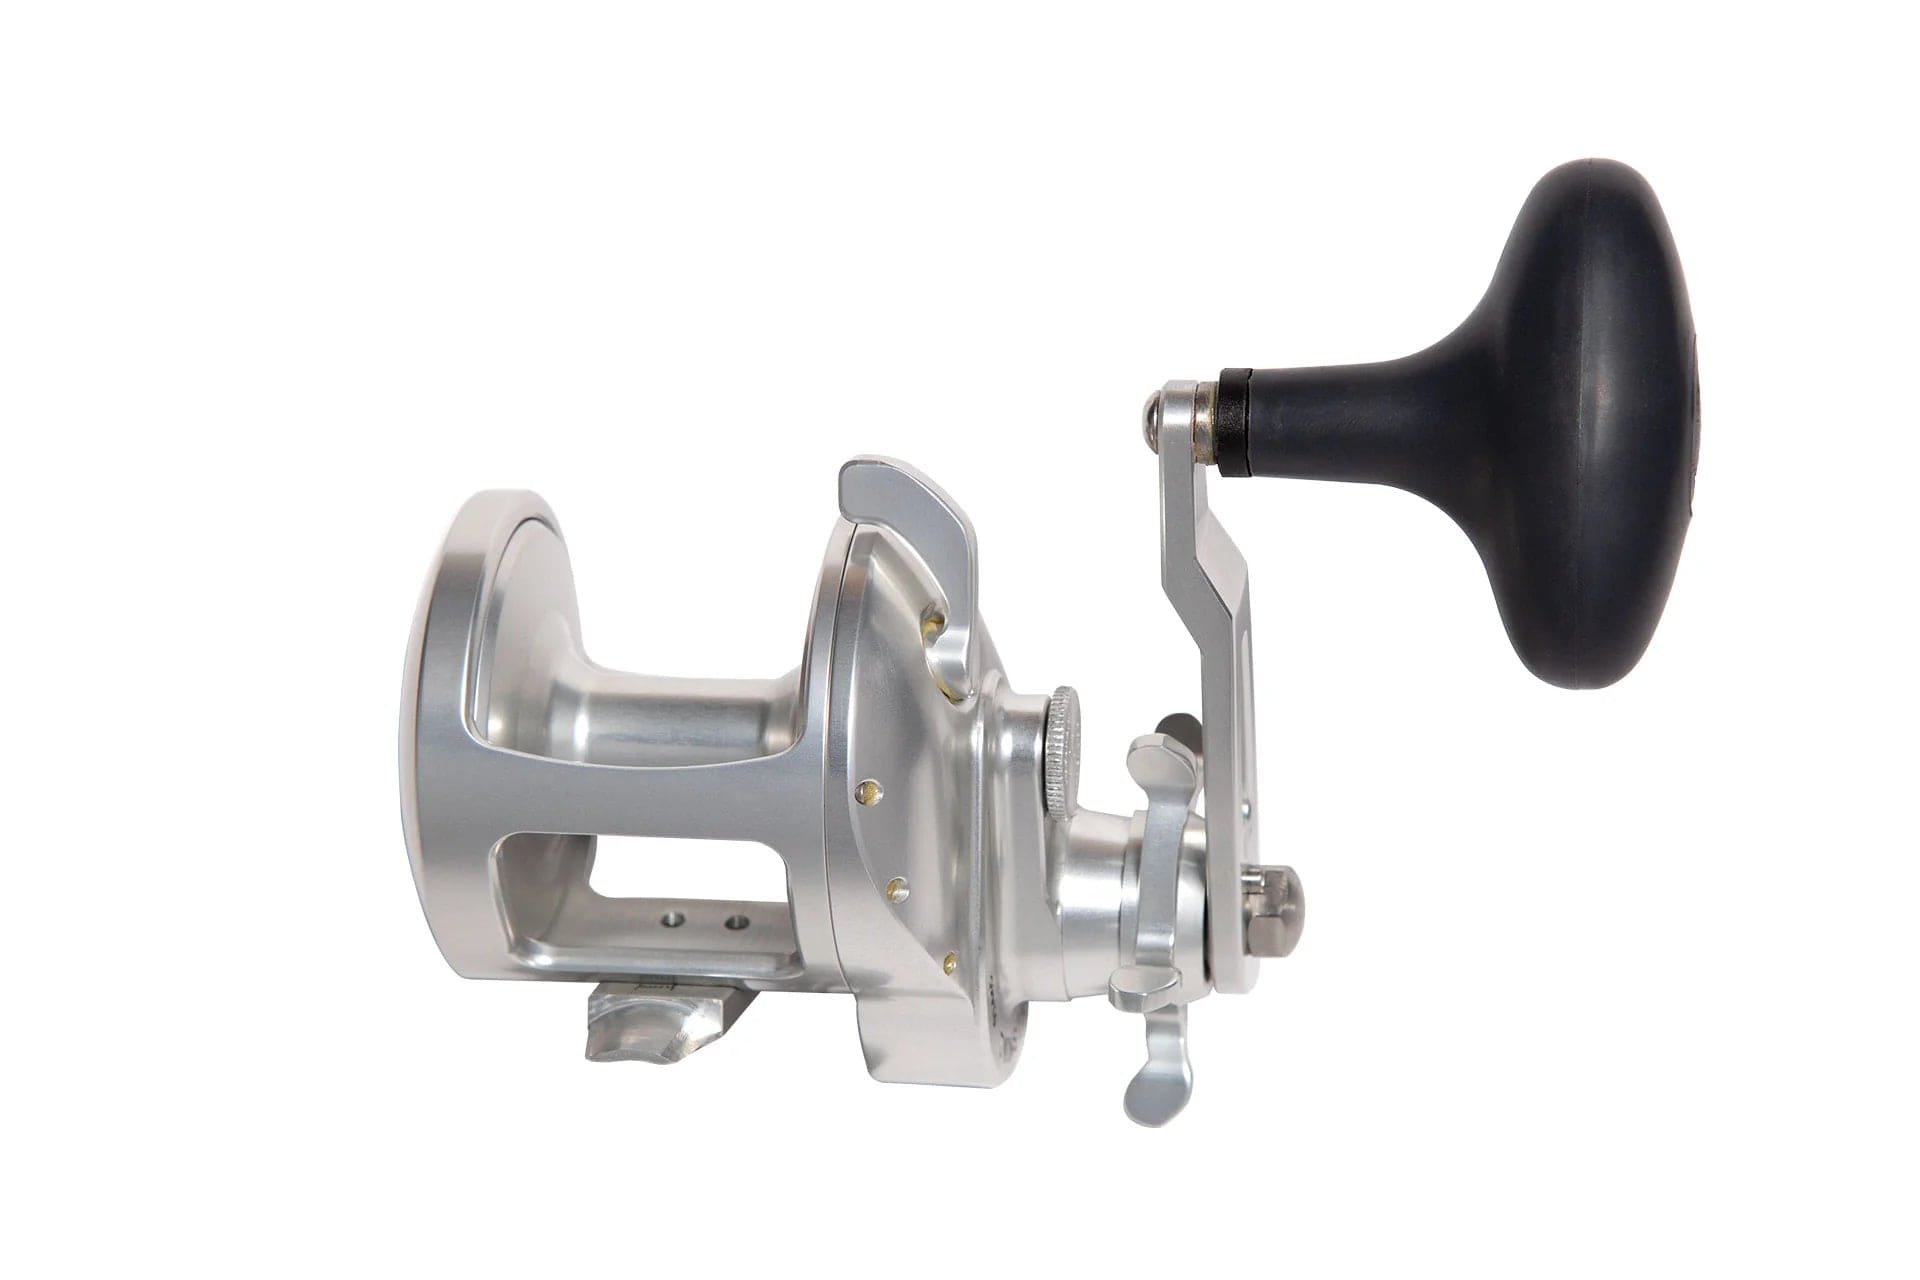 Accurate Tern 2 Star Drag Conventional Reels - The Saltwater Edge